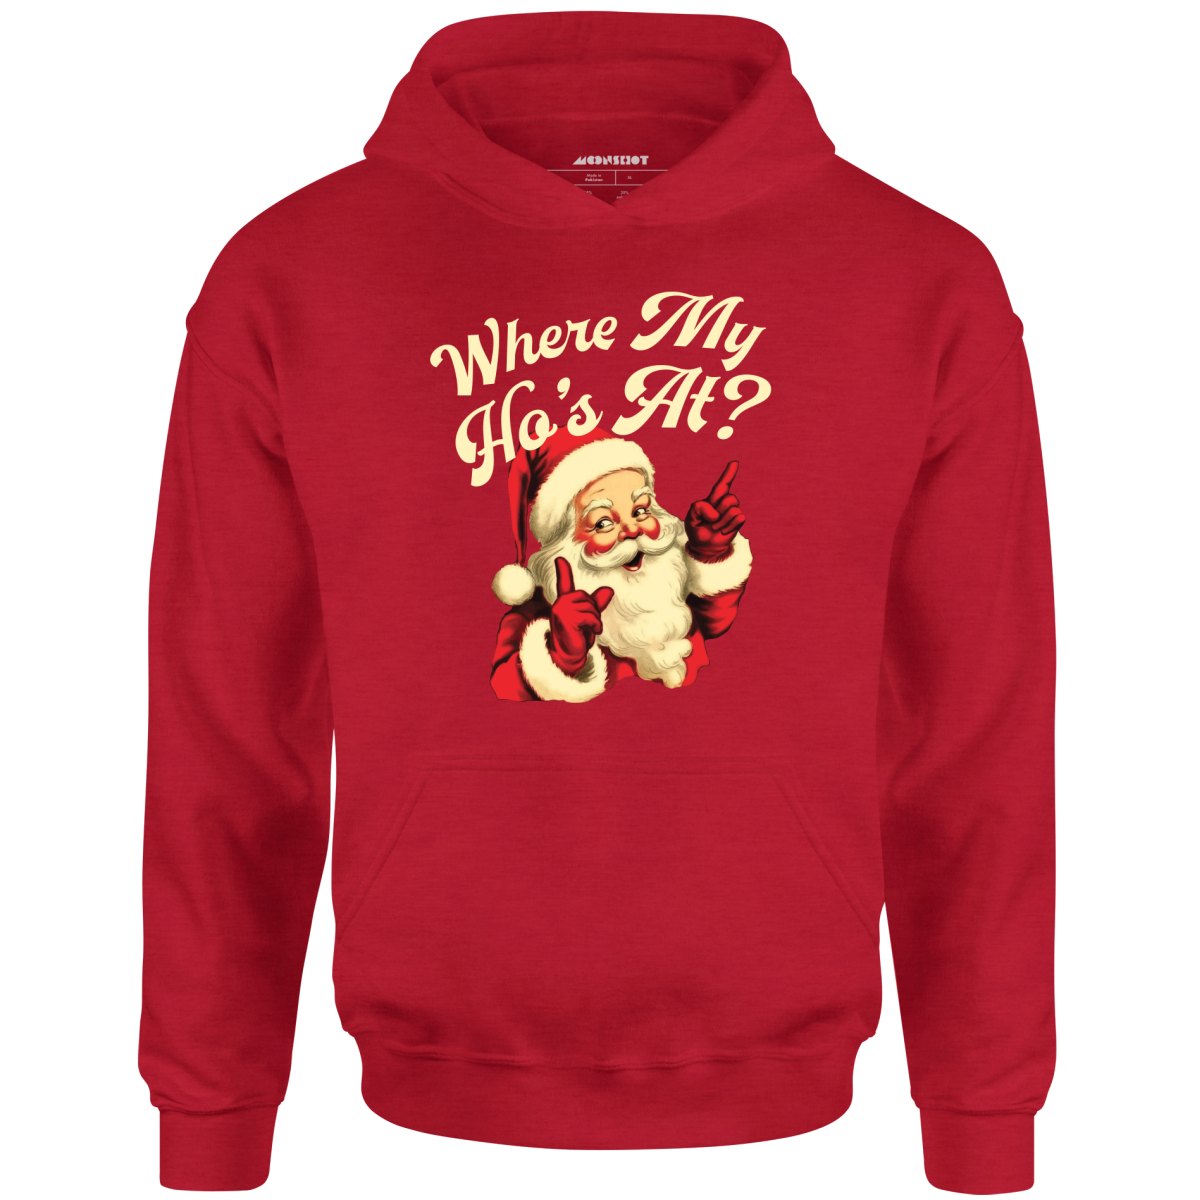 Where My Ho's At? - Unisex Hoodie